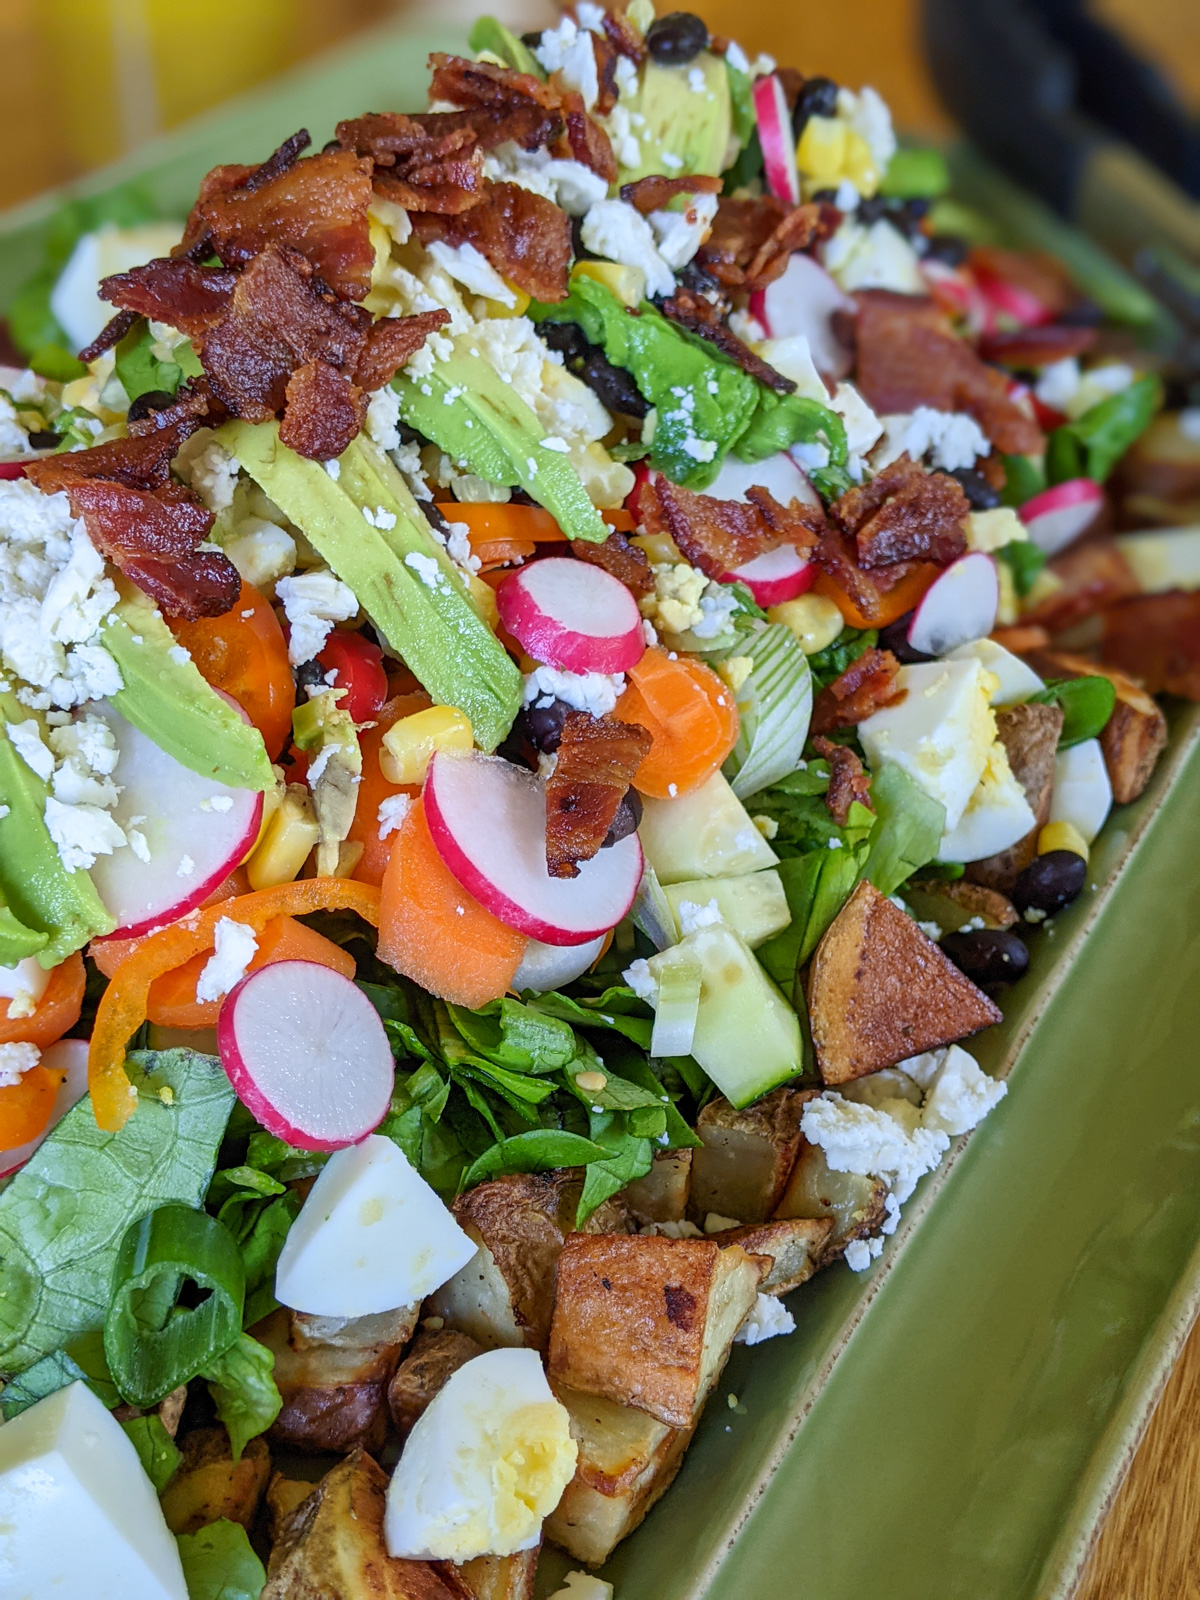 A raw and roasted dinner salad with potatoes, bacon, radishes, greens and crumbled cheese.